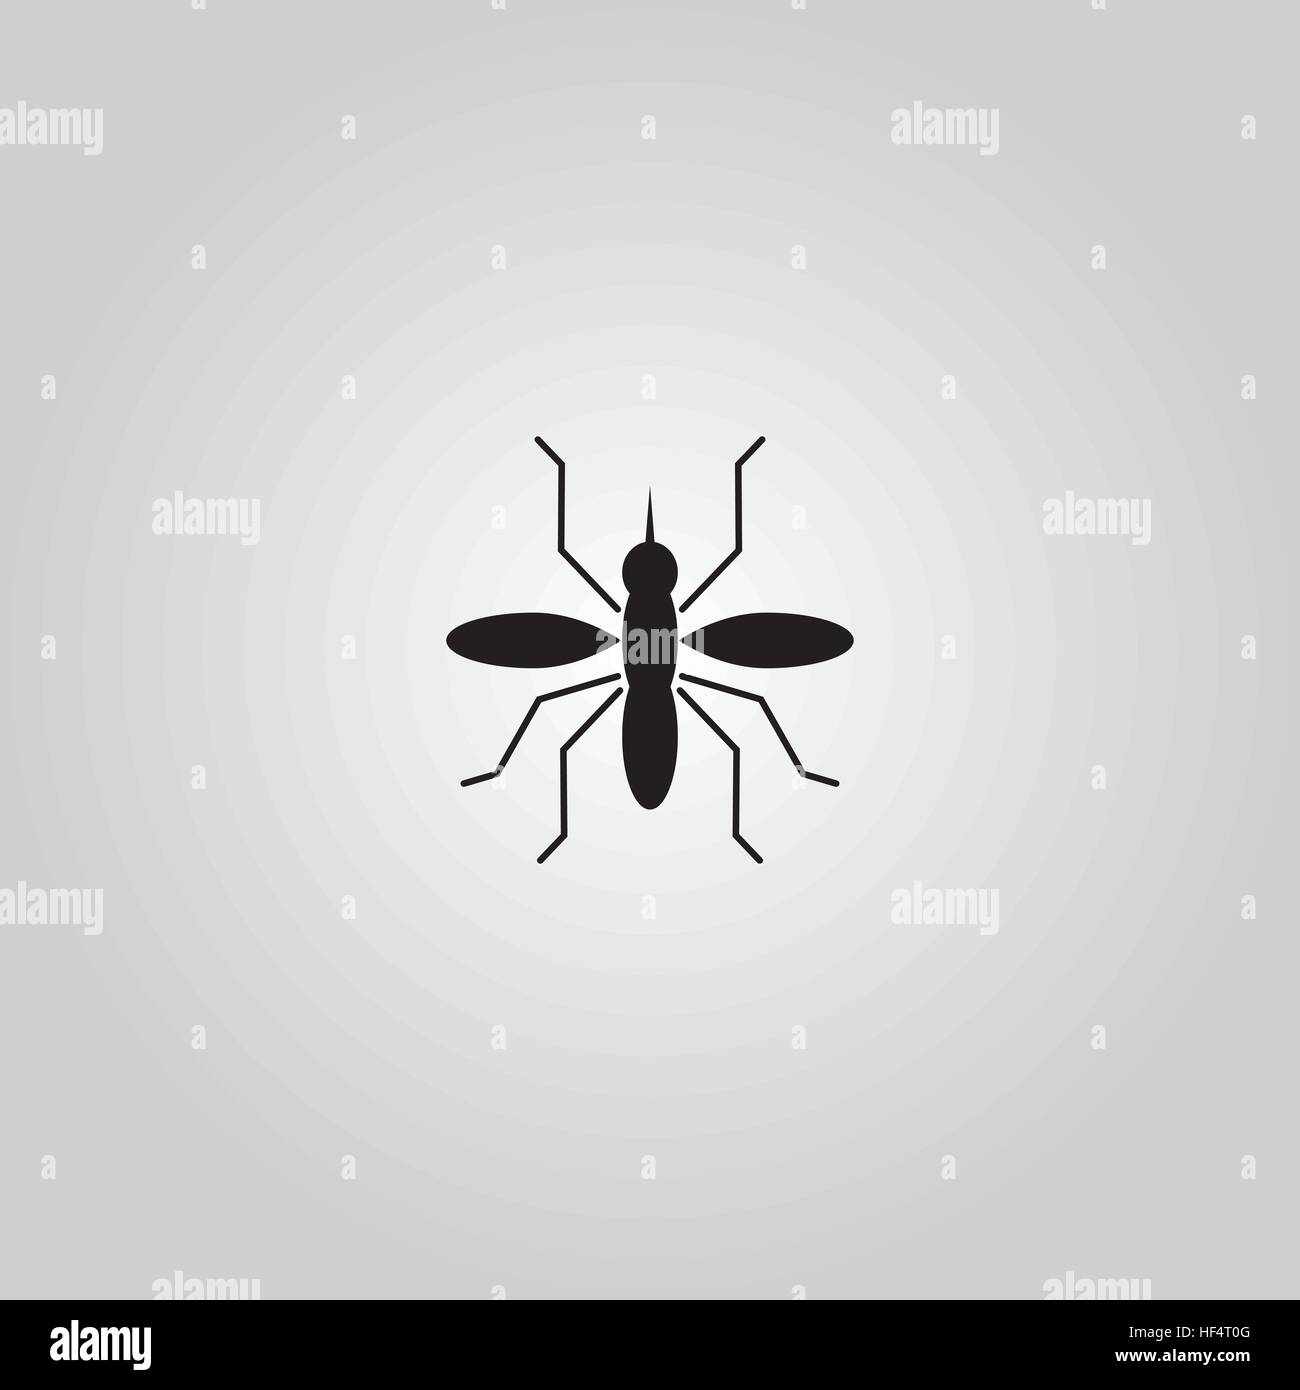 Mosquito icon vector. Flat icon isolated on the white background. Editable EPS file. Vector illustration. Stock Vector